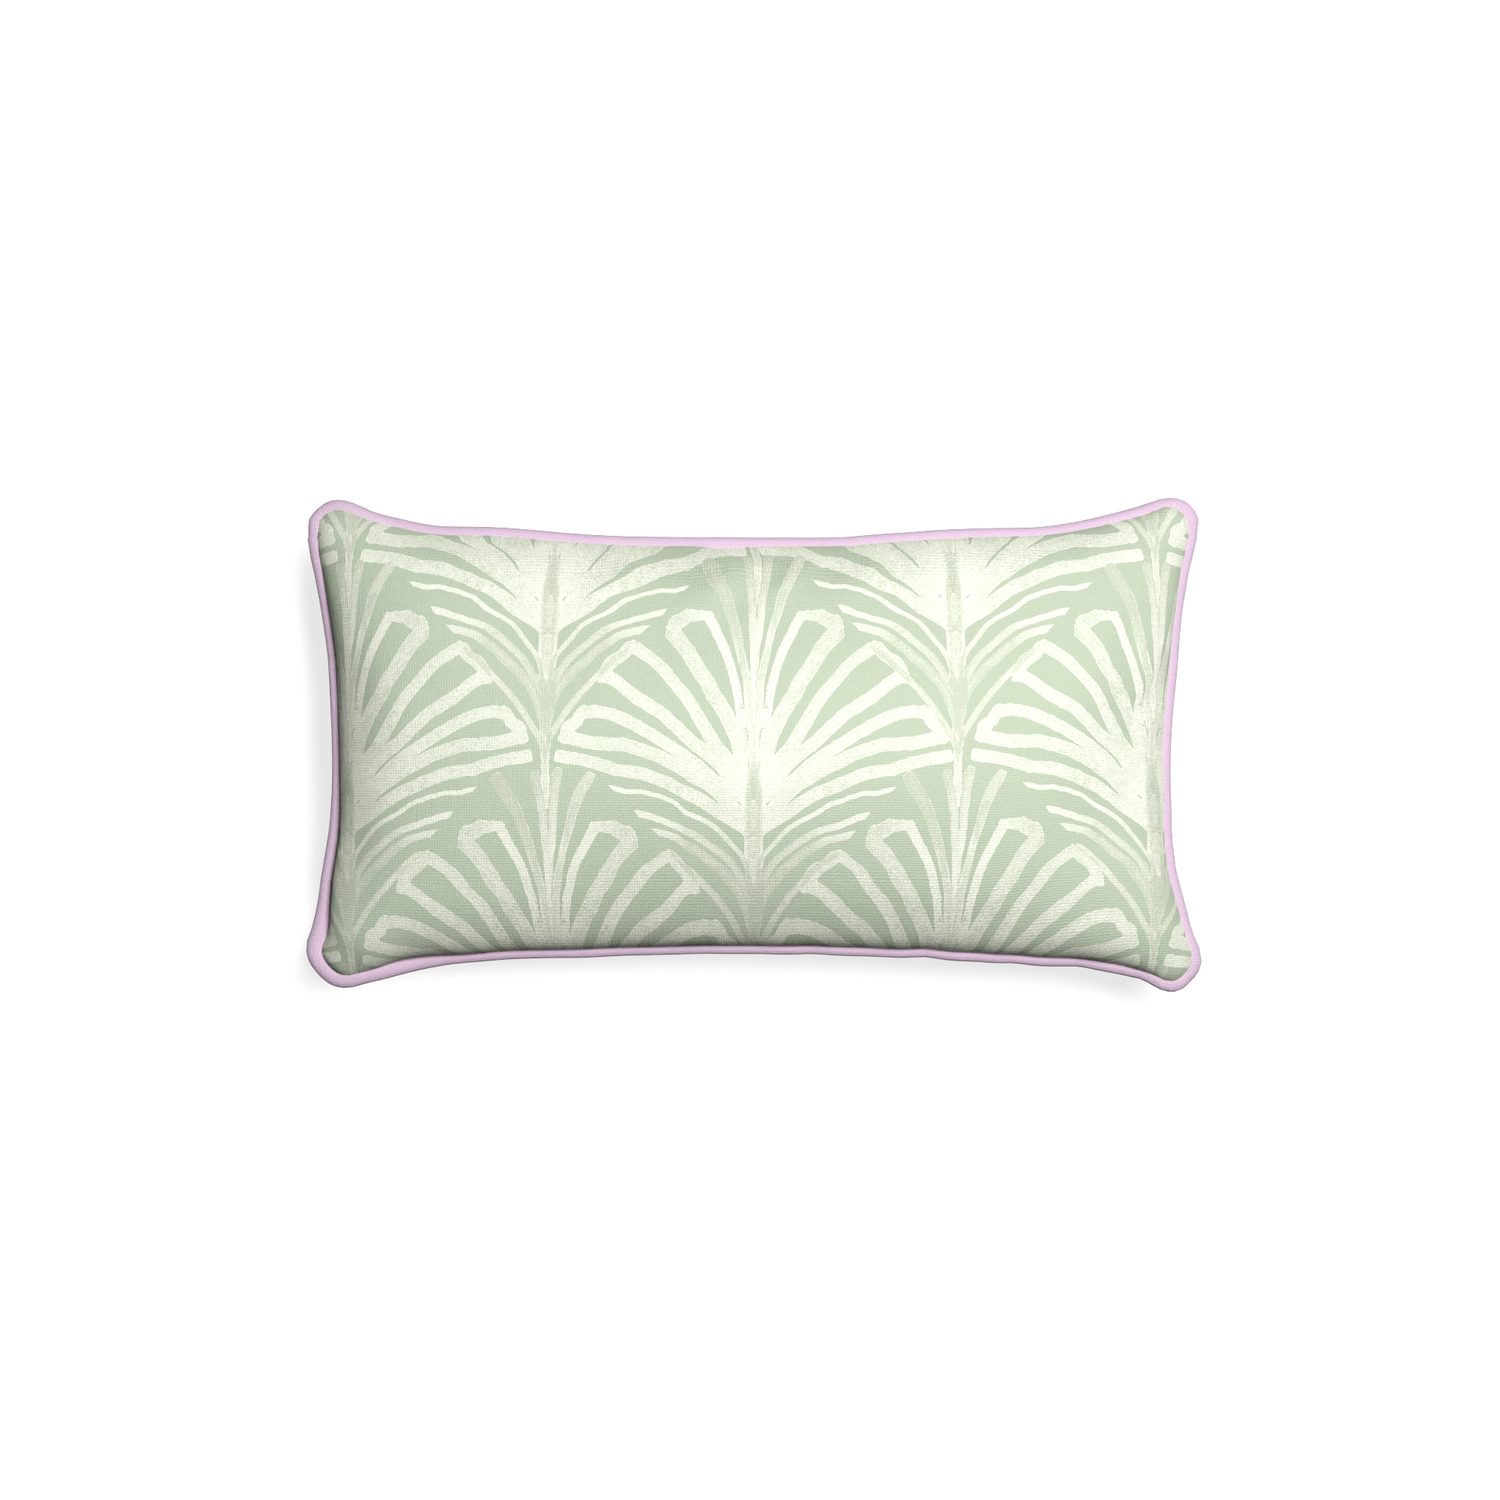 Petite-lumbar suzy sage custom sage green palmpillow with l piping on white background